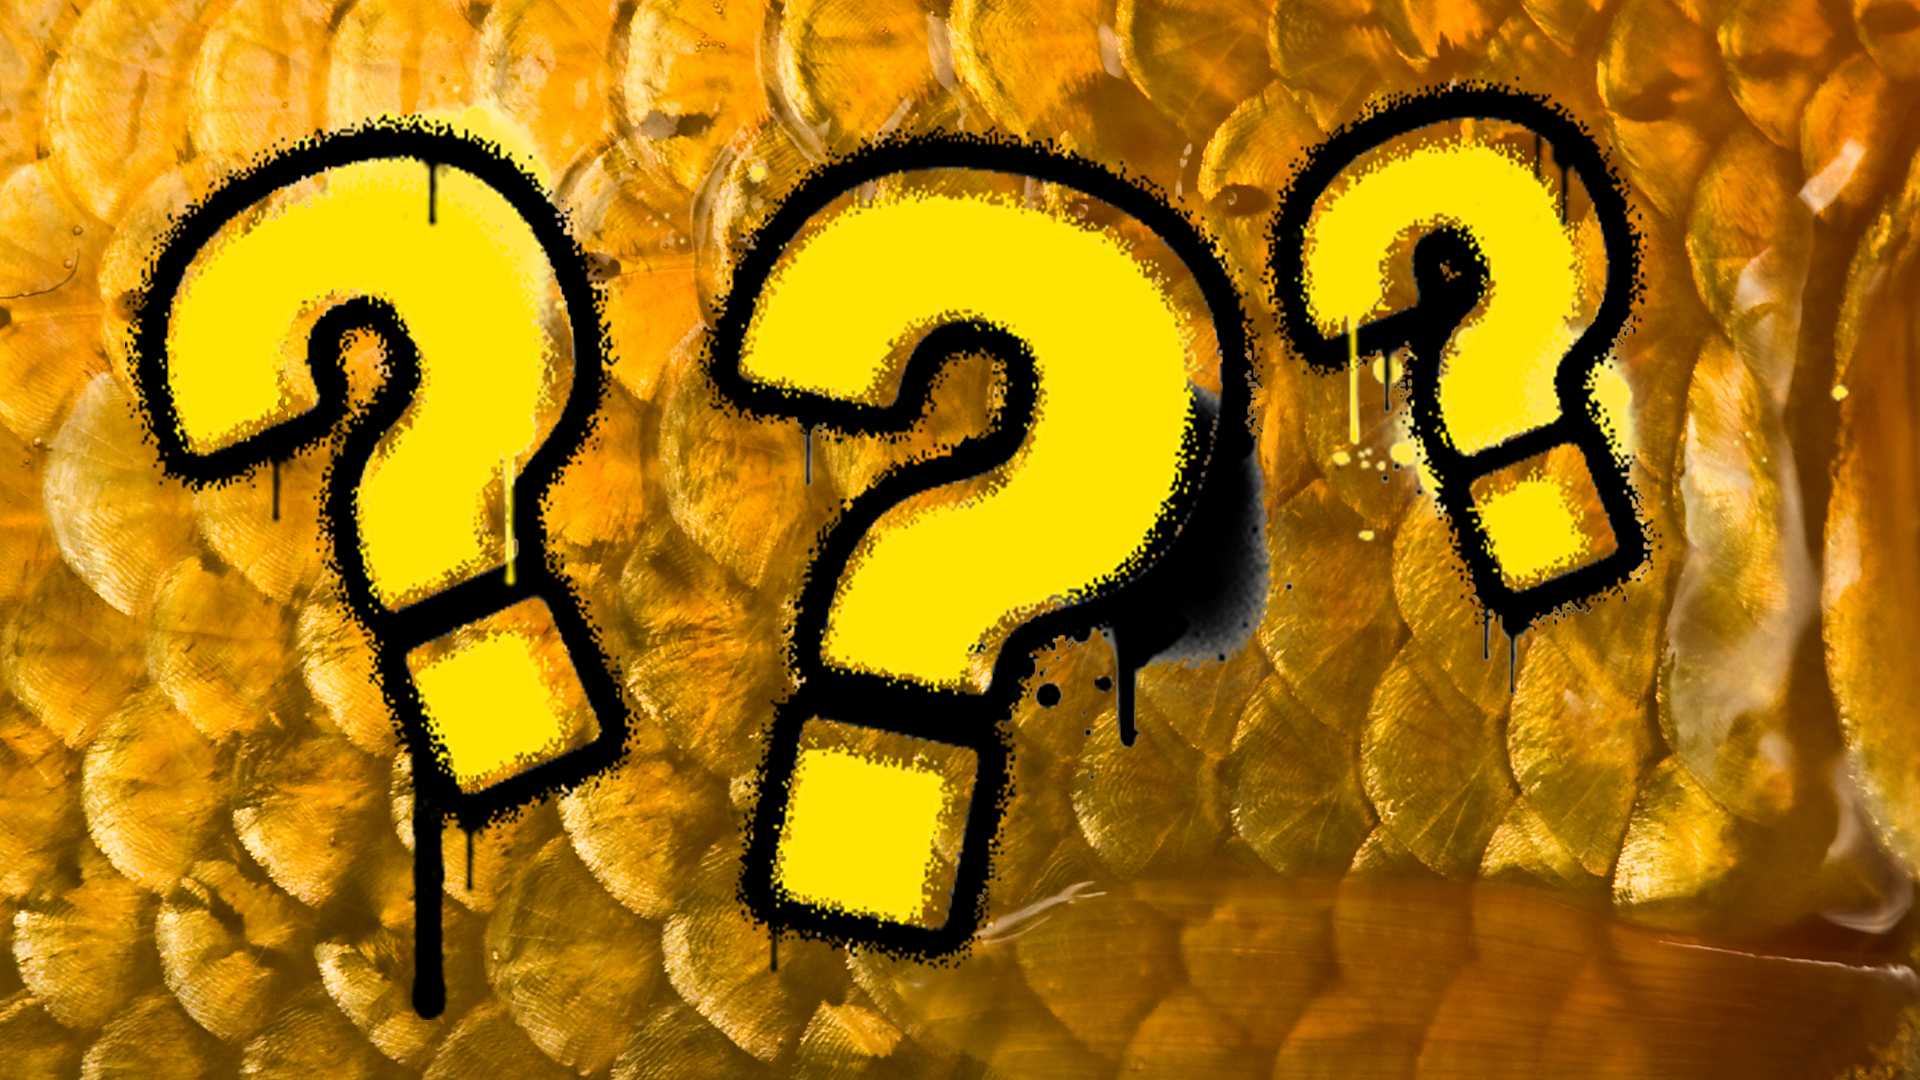 Golden scales and question marks